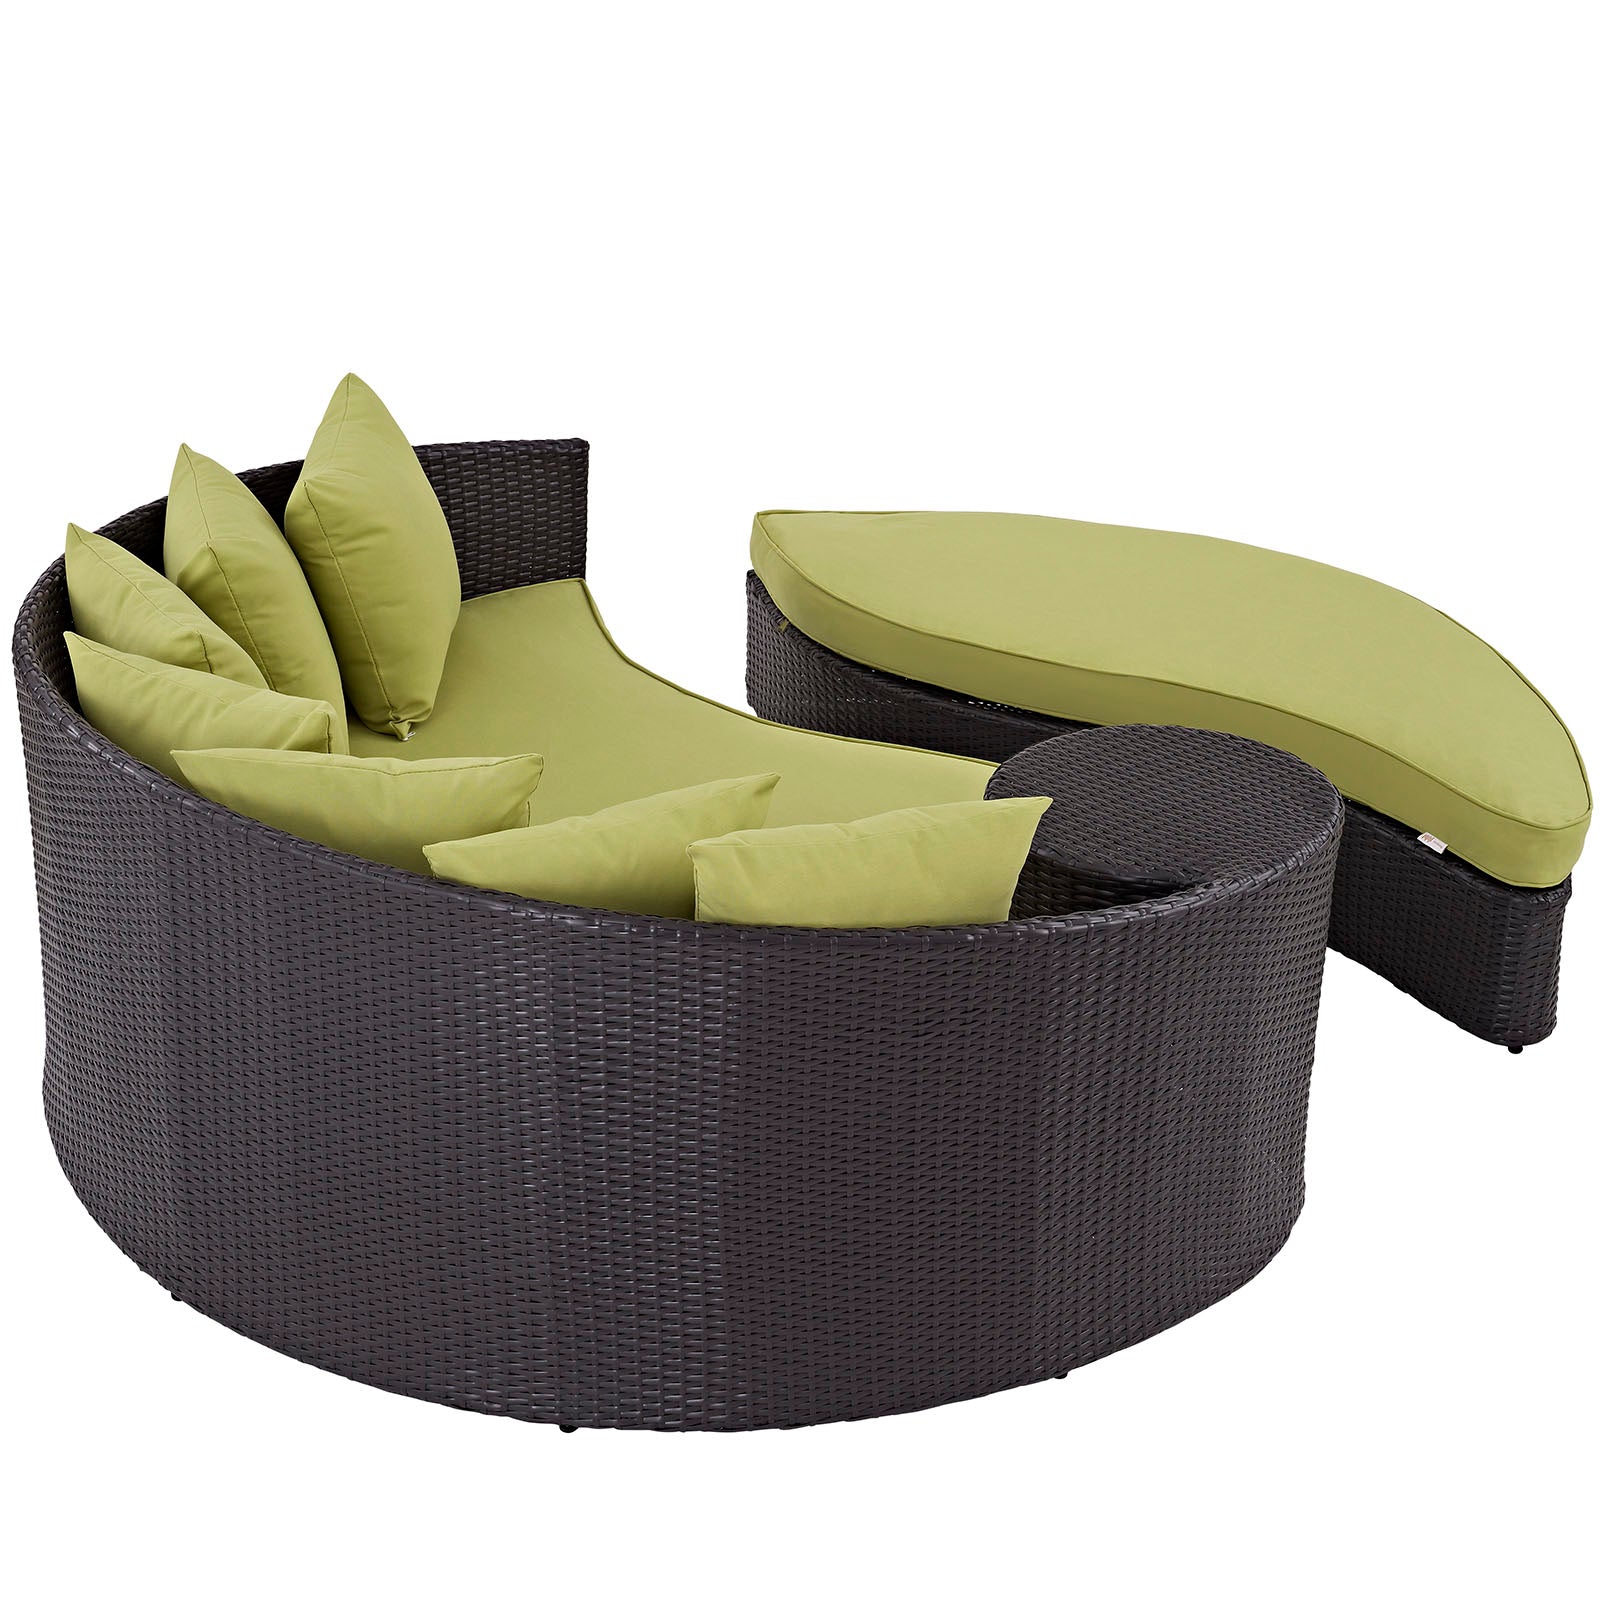 Modway Patio Daybeds - Convene Outdoor Patio Daybed Espresso Peridot